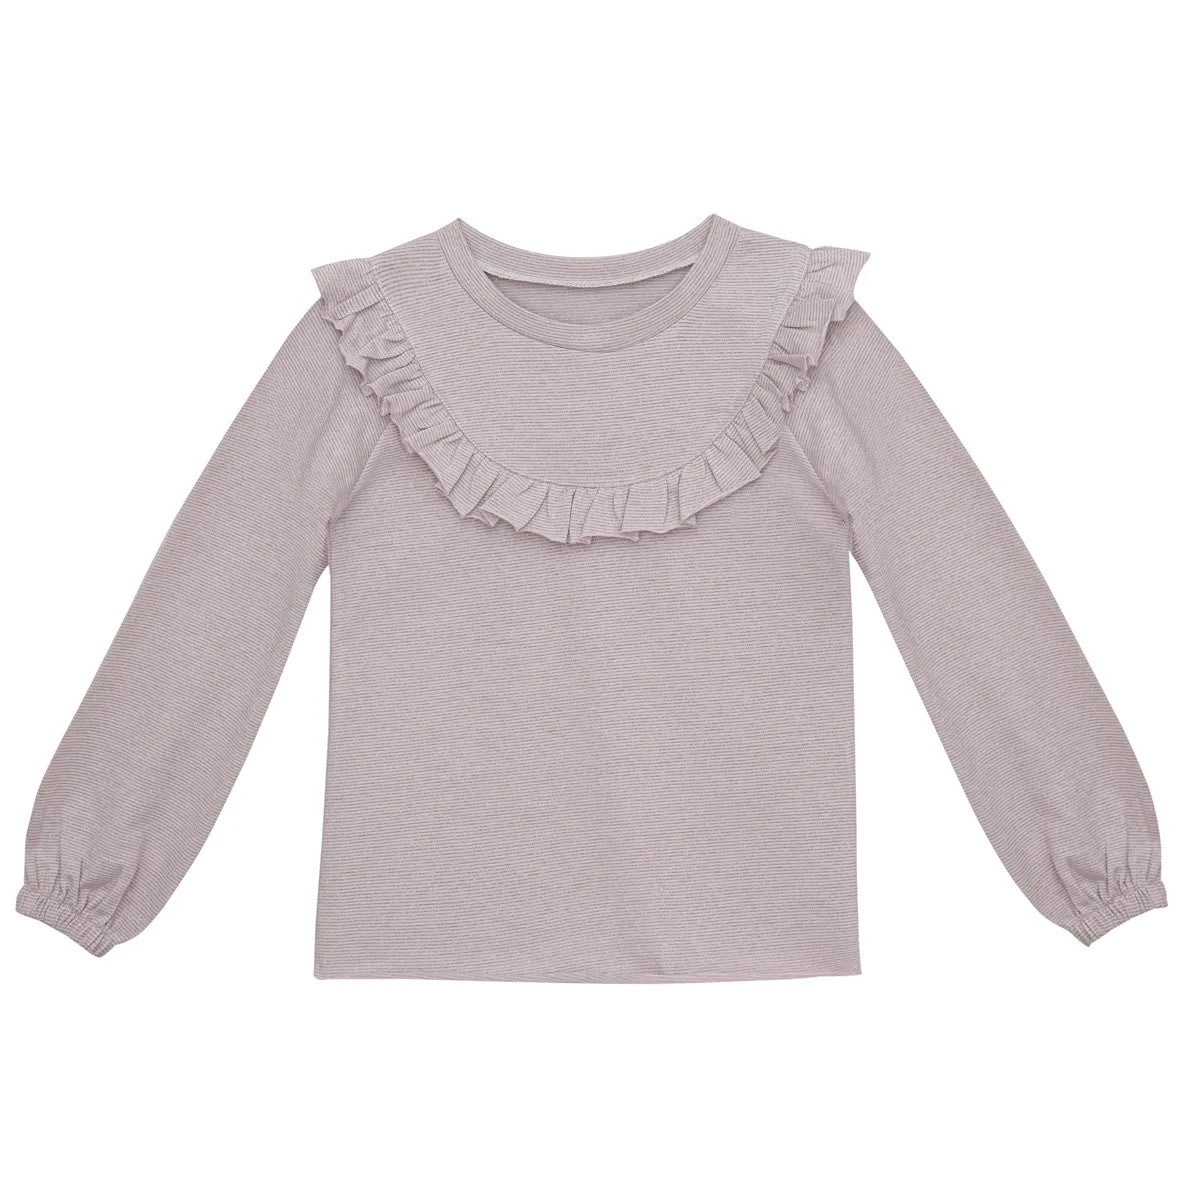 Little Hedonist very girly, very fancy Lavender Frost round-neck top with golden details